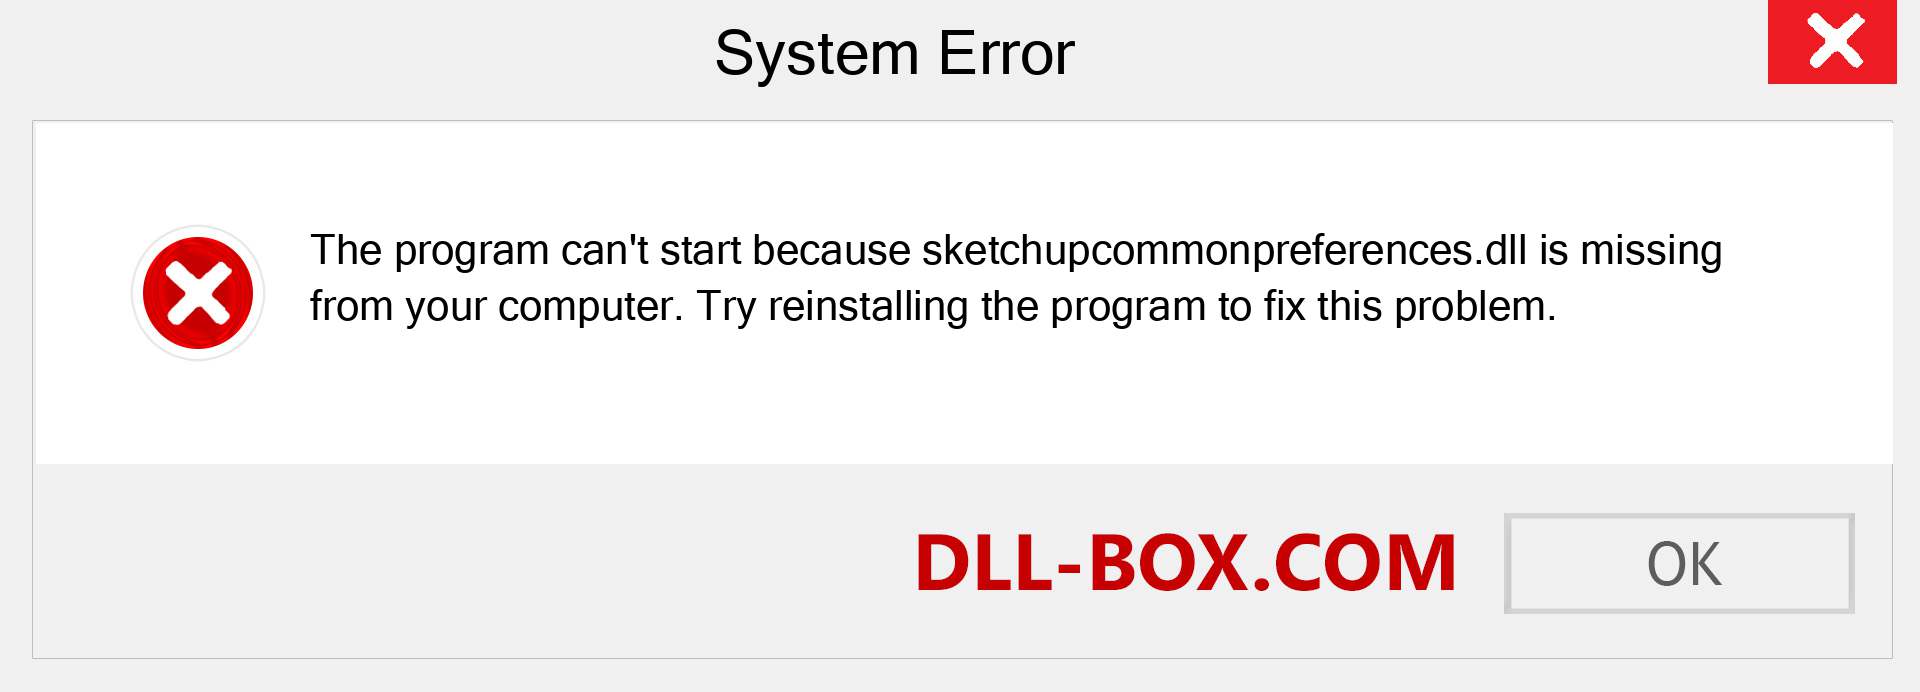  sketchupcommonpreferences.dll file is missing?. Download for Windows 7, 8, 10 - Fix  sketchupcommonpreferences dll Missing Error on Windows, photos, images